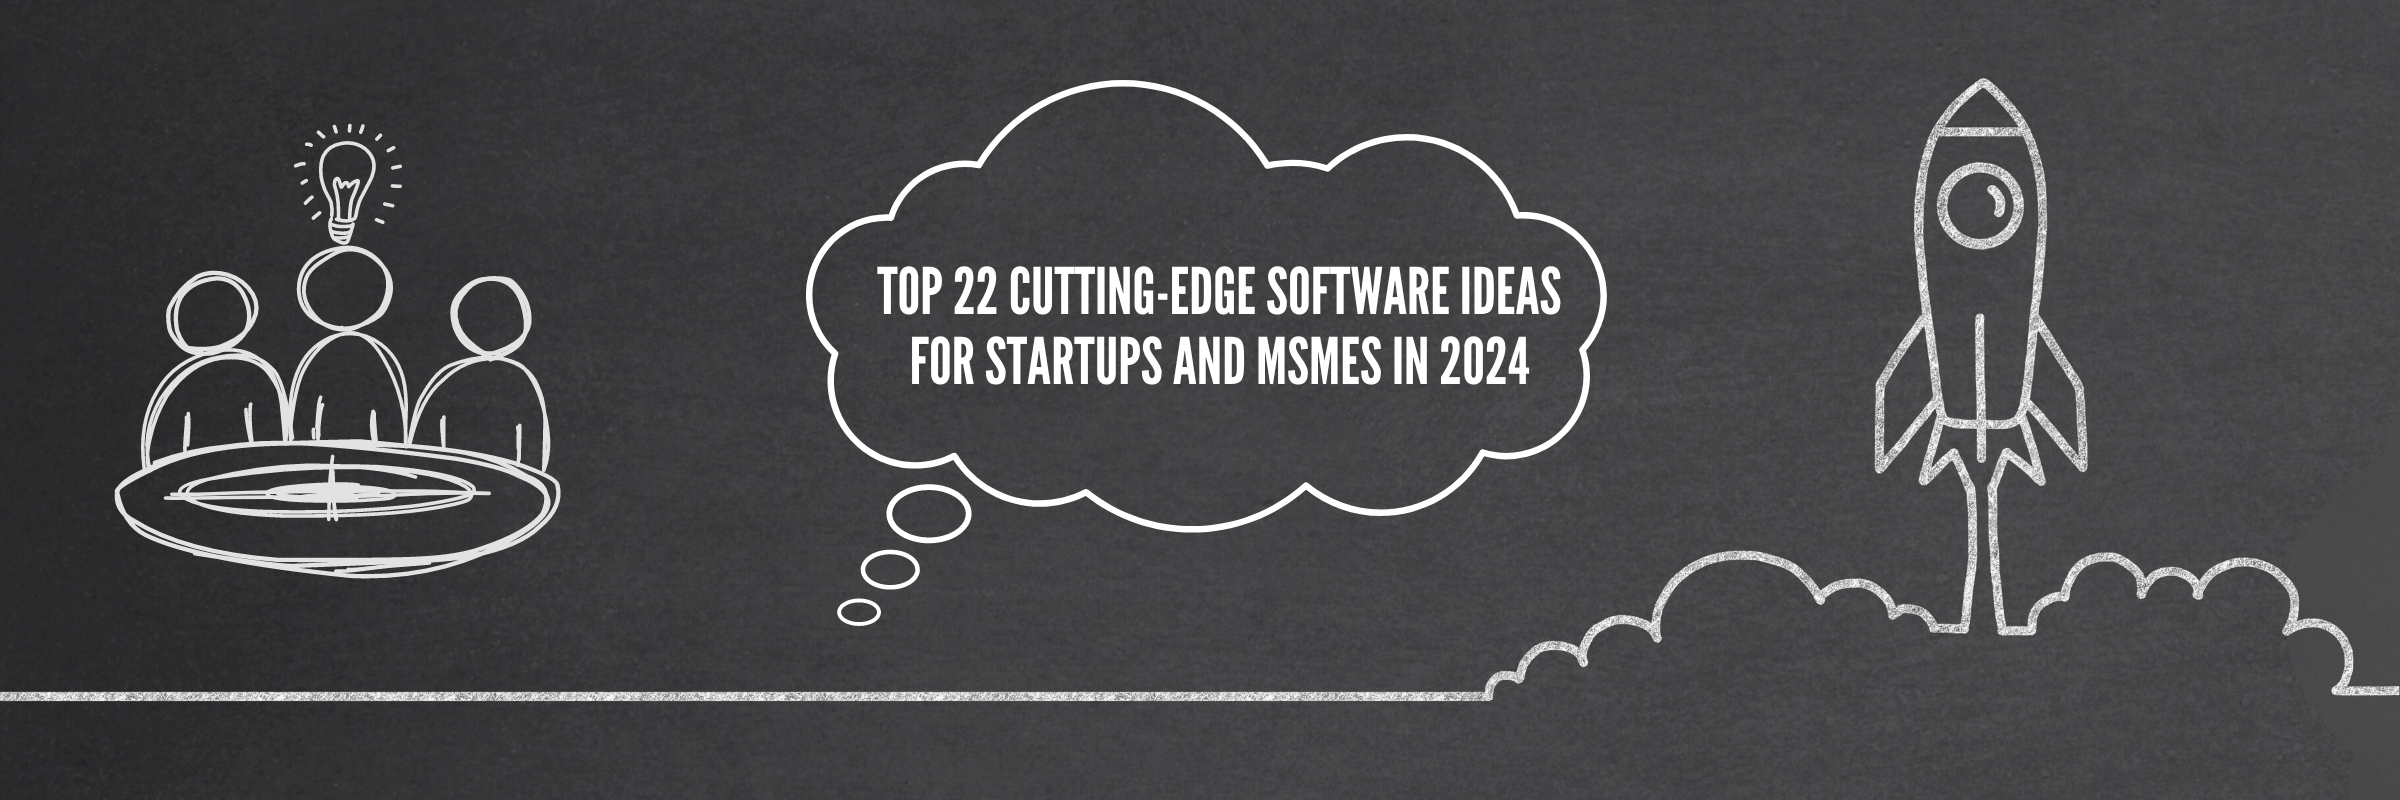 Top 22 Cutting-Edge Software Ideas For Startups and MSMEs in 2024